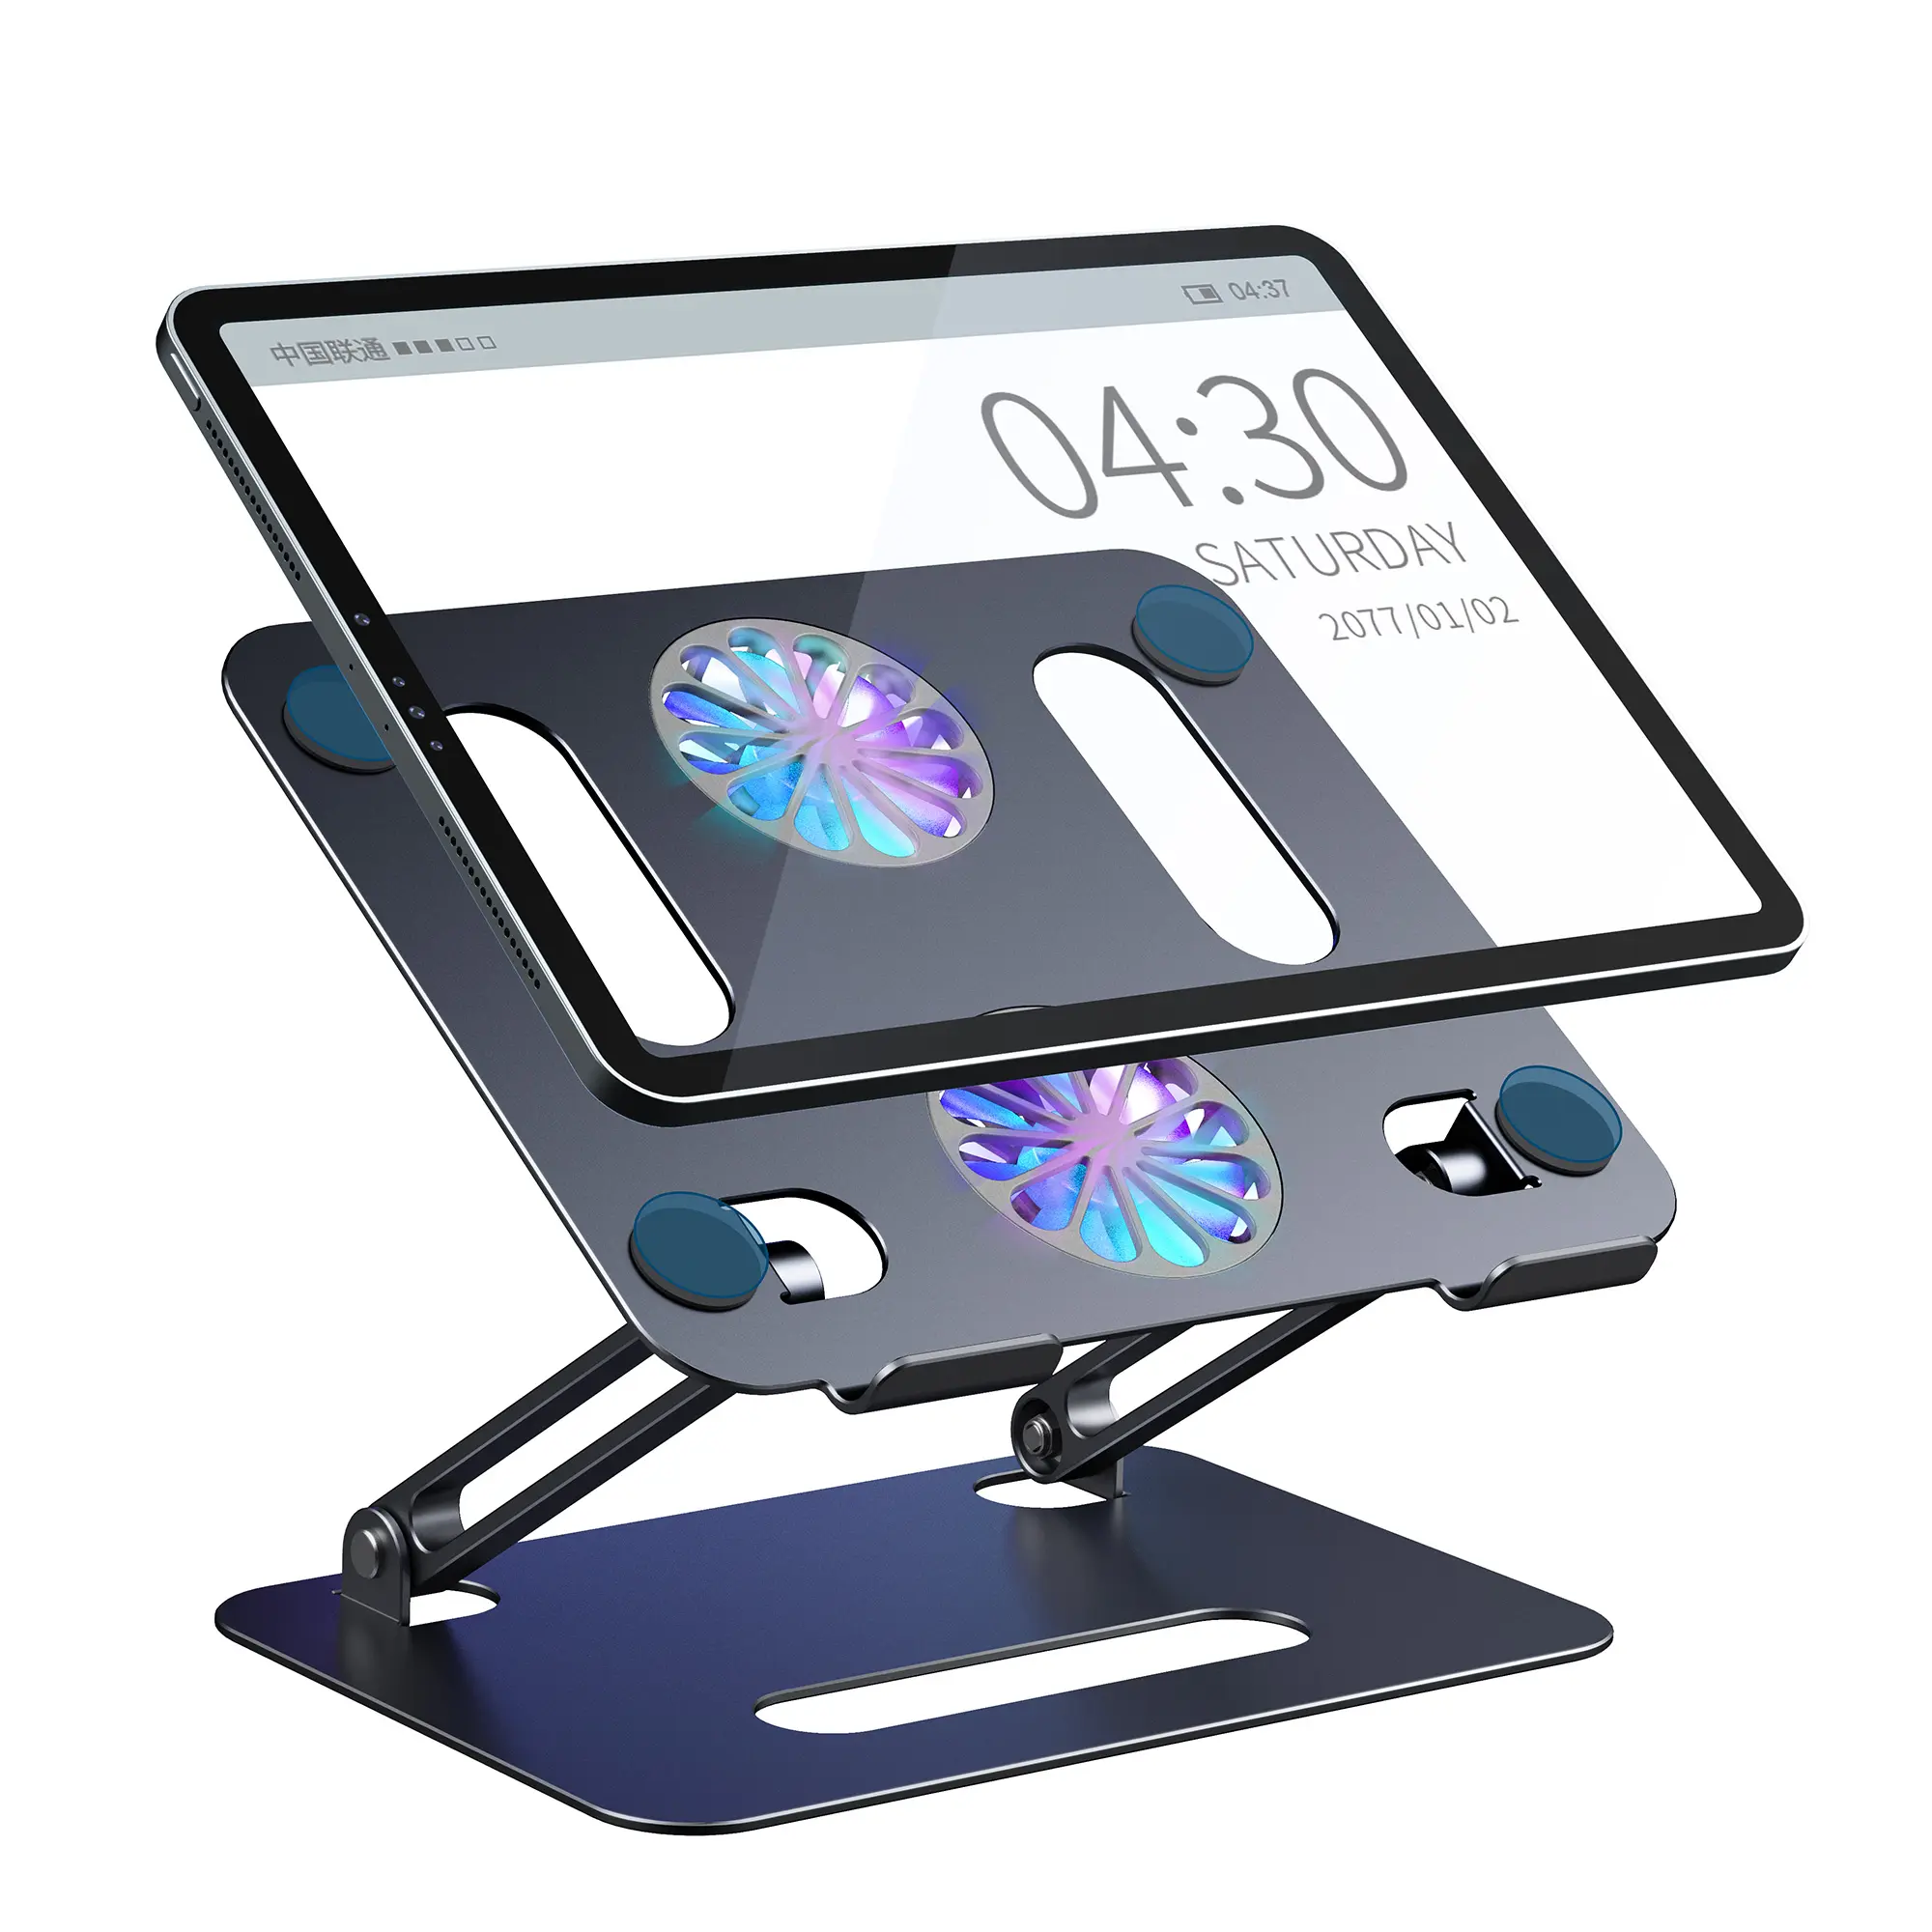 Ergonomic Adjustable Laptop Cooling Pad Portable Aluminum Laptop Stand Laptop Holder Foldable Computer Stand Notebook Stand